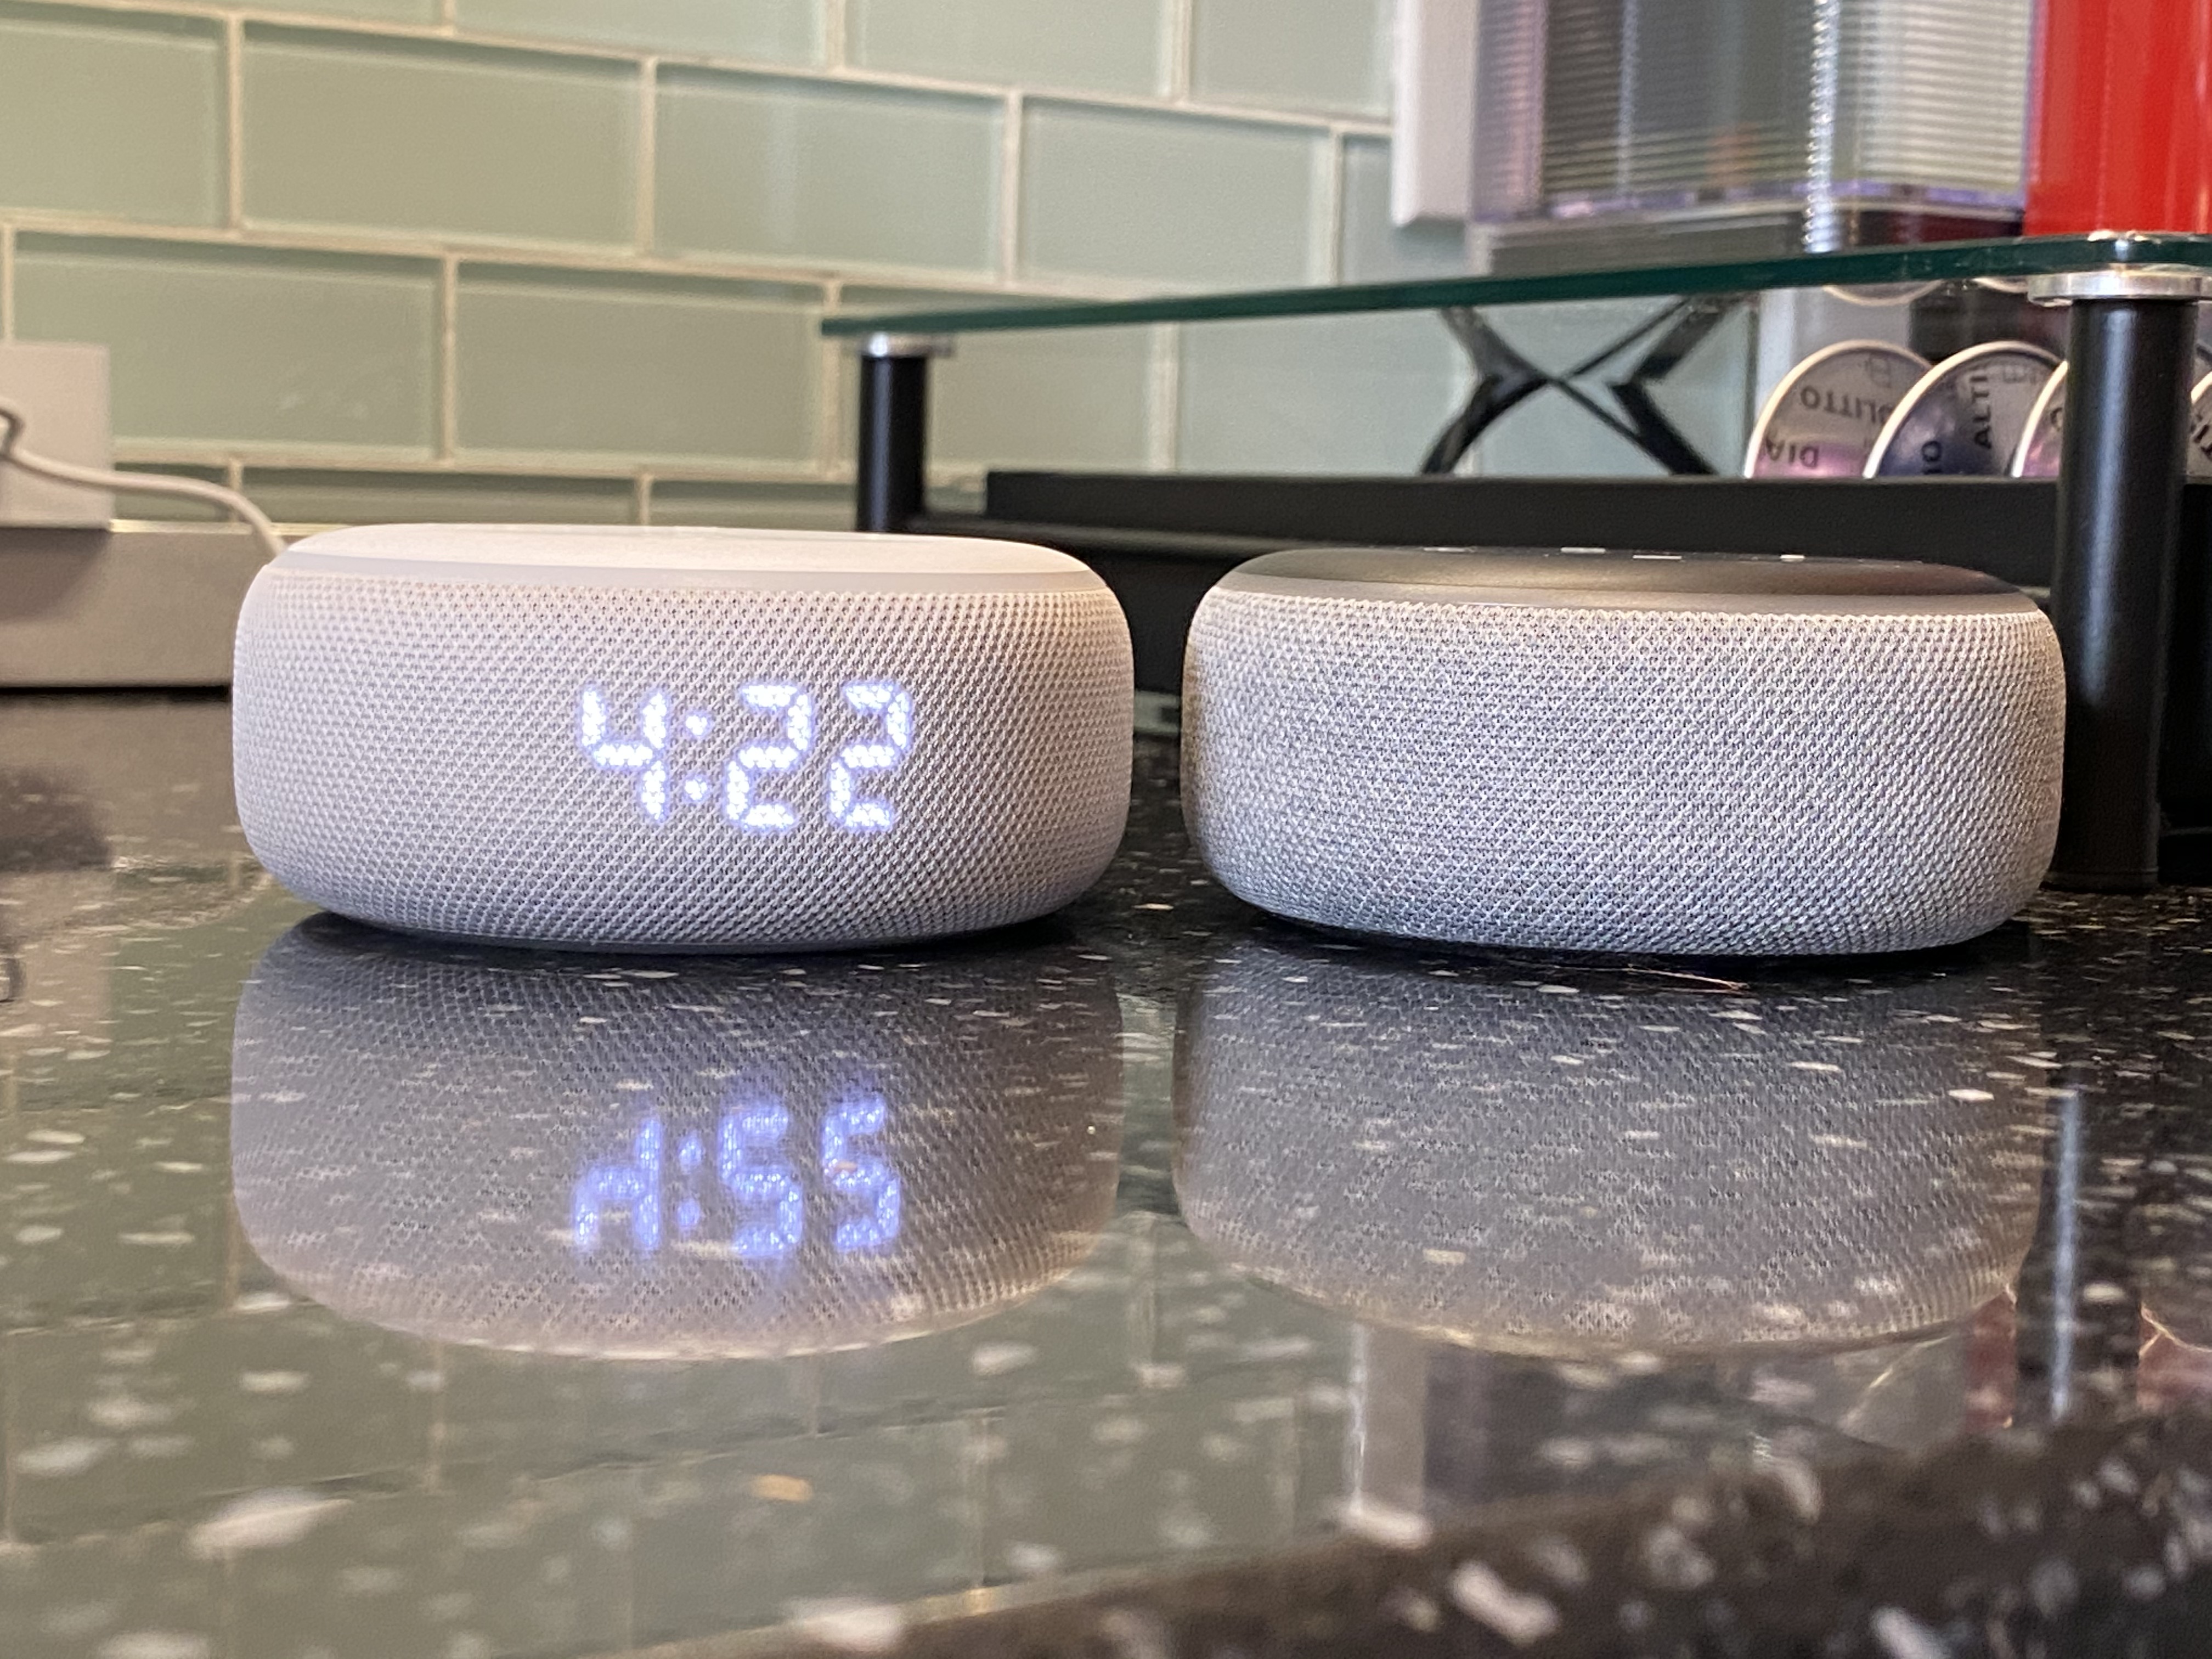 does amazon echo dot need to be plugged in all the time